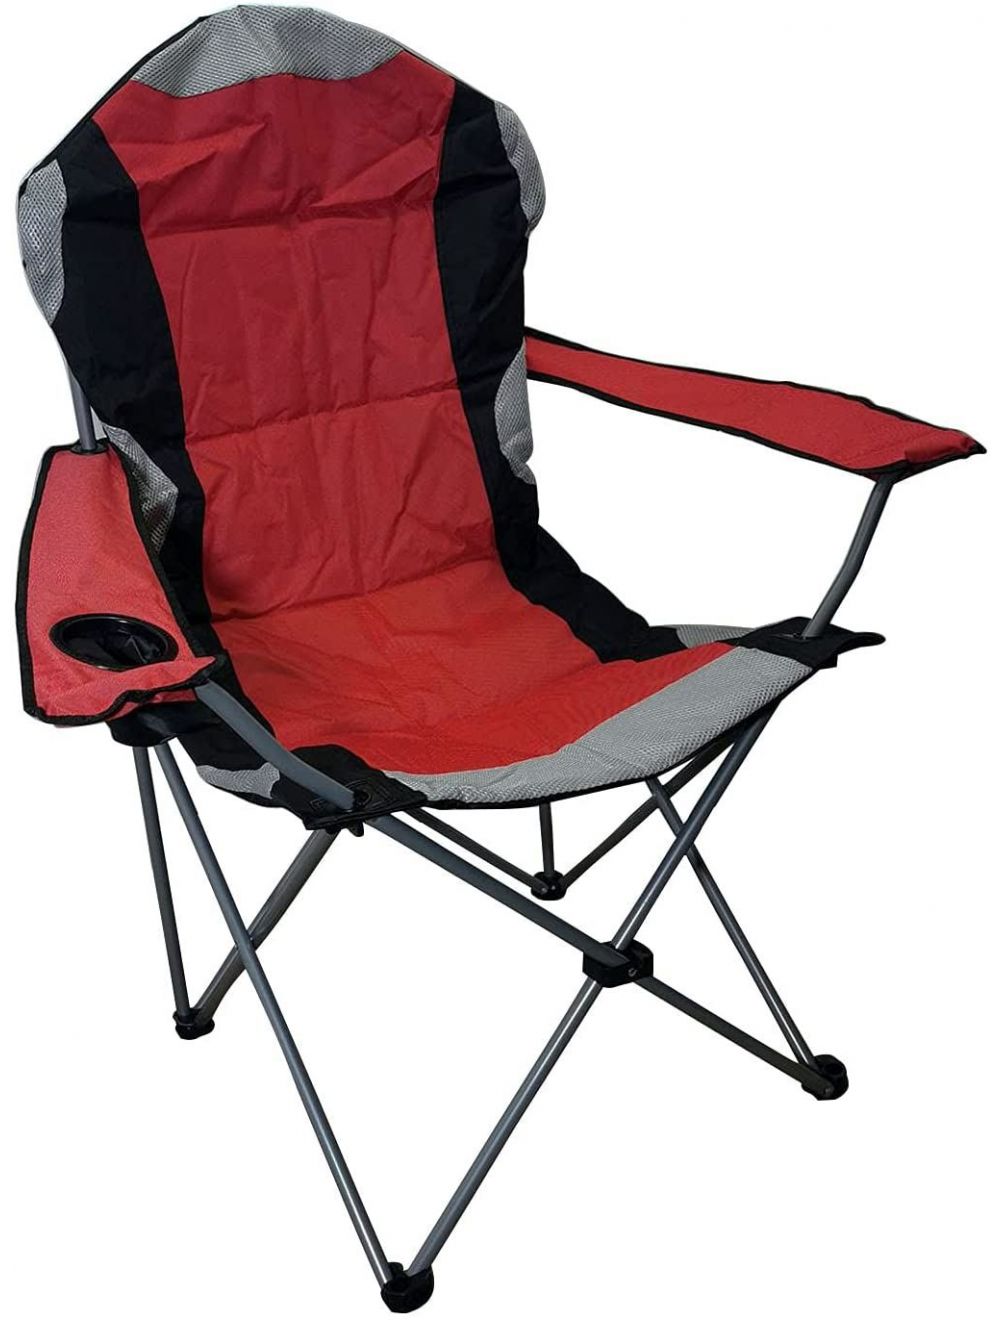 Heavy Duty Luxury Canvas Padded High Backrest with Insulated Cup Holder  Folding Camping Fishing Chair Red